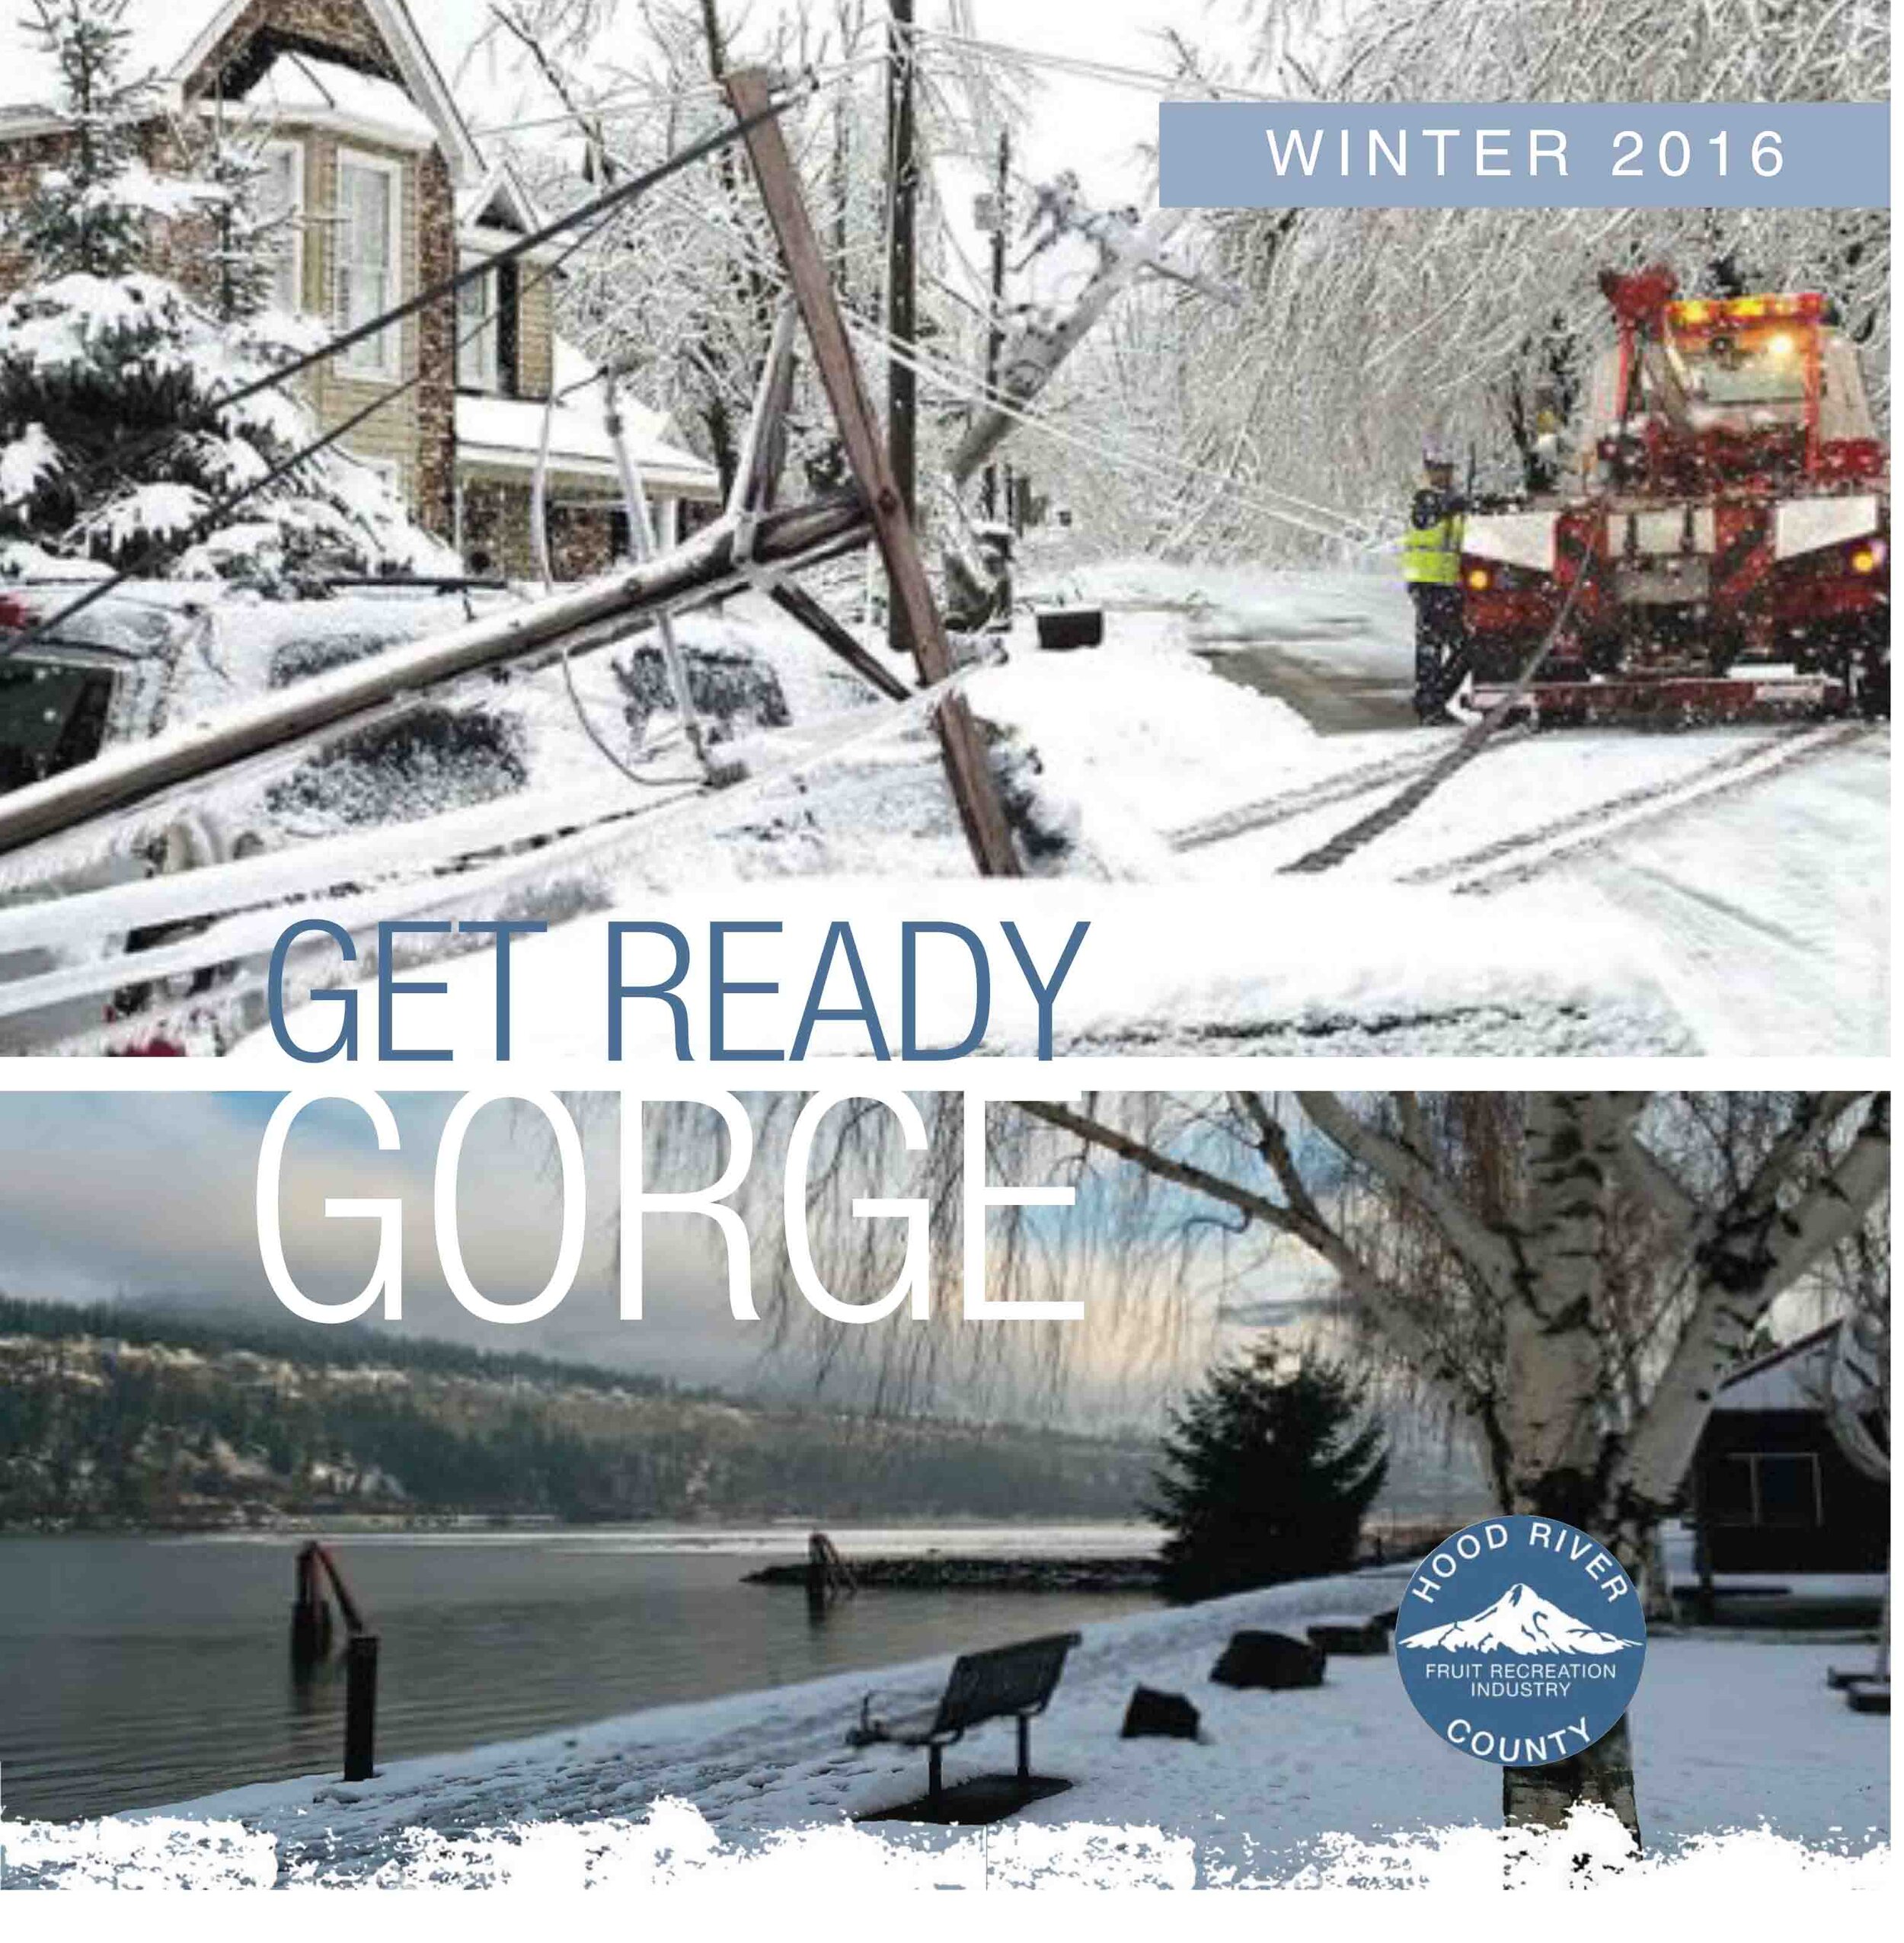 Get Ready Gorge guide - winter